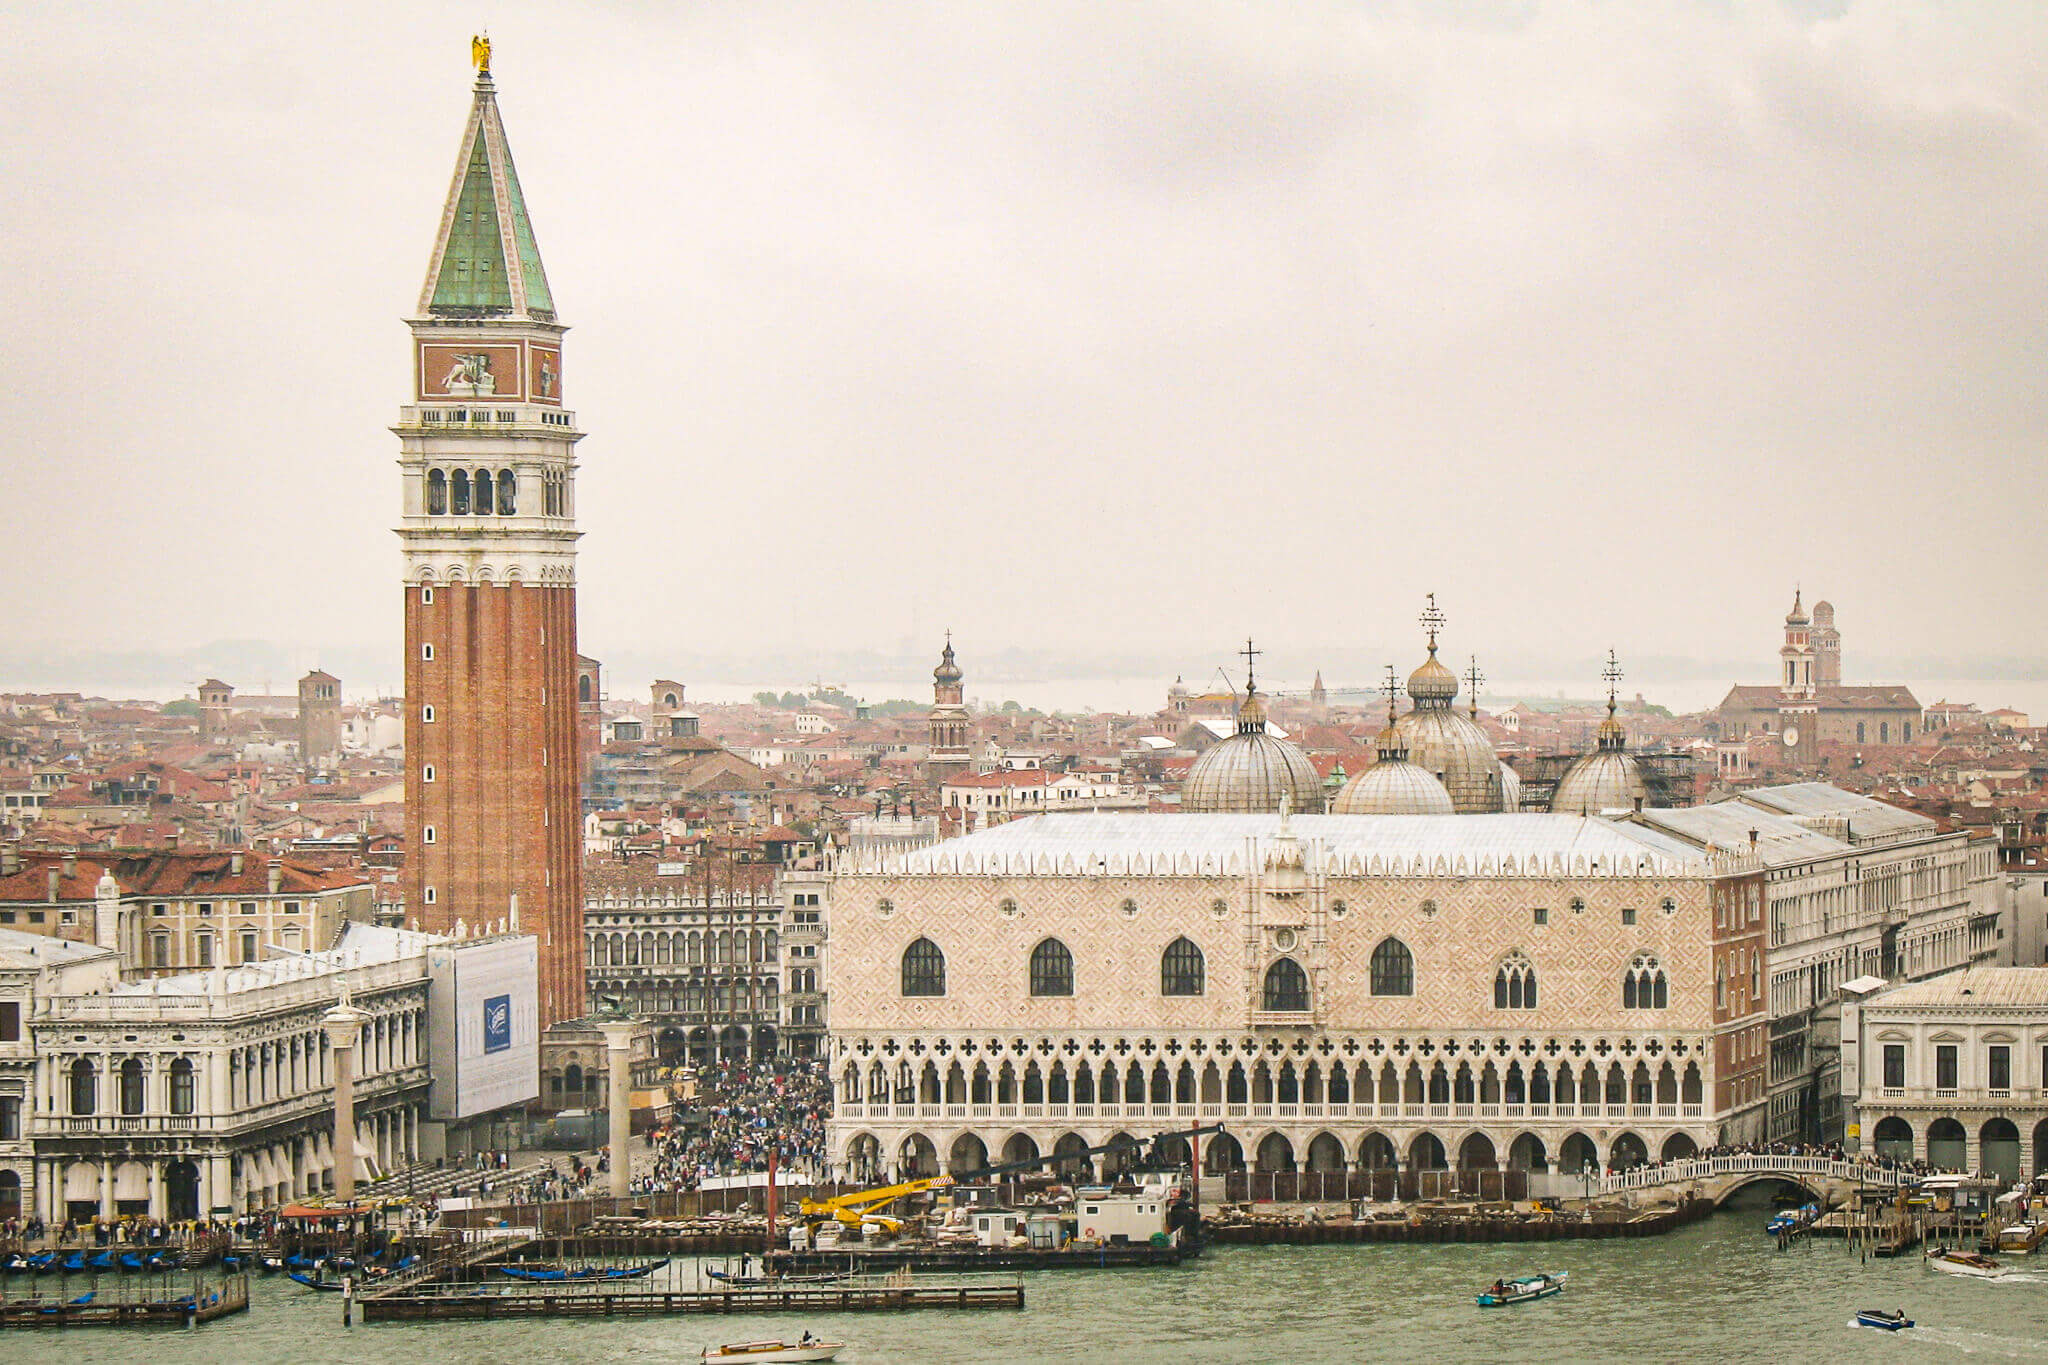 San Marco Basilica, the Campanile and Doge's Palace in Venice